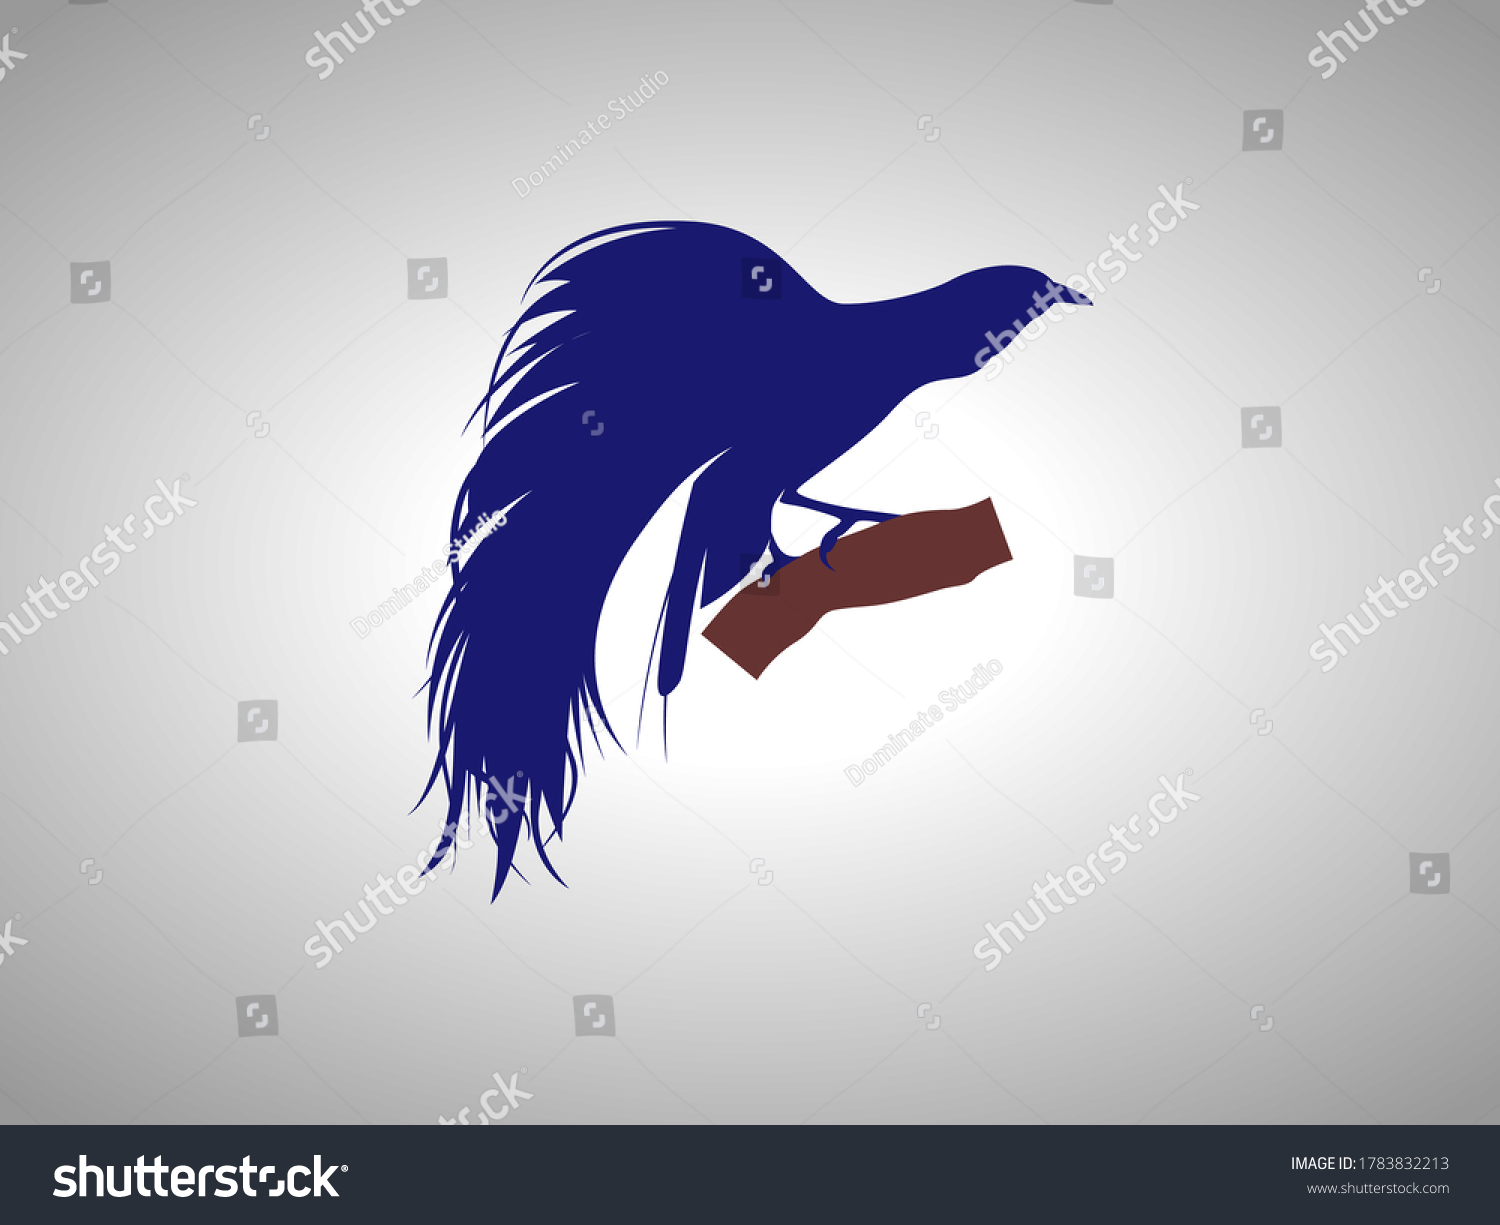 SVG of Cendrawasih Silhouette on White Background. Isolated Vector Animal Template for Logo Company, Icon, Symbol etc svg